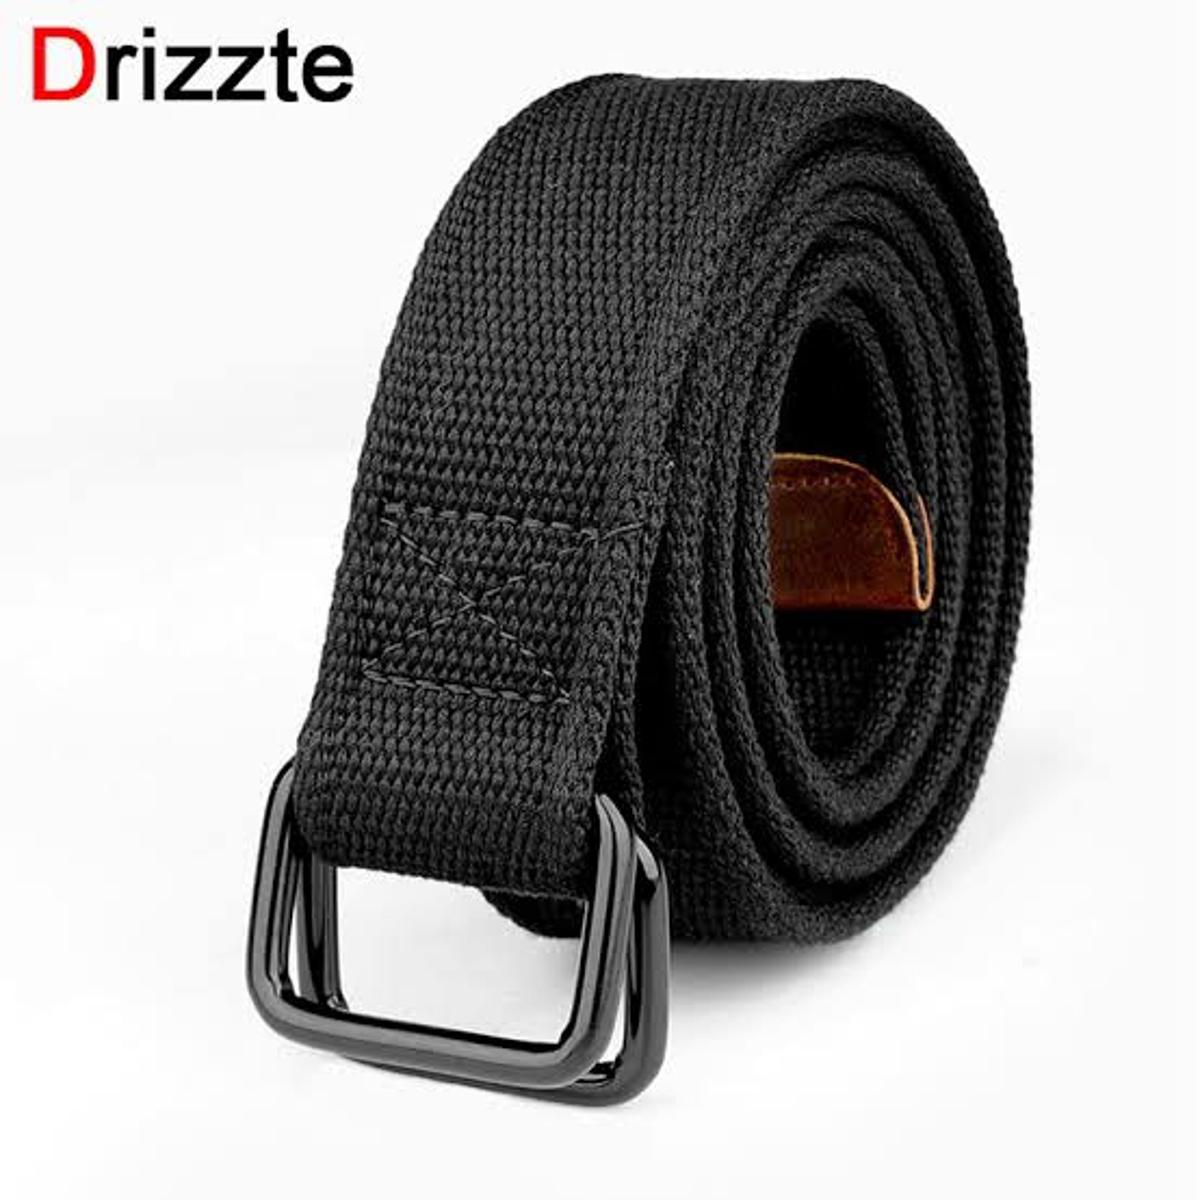 KamroPlus Free Size Long Double Ring Big Mens Canvas Fabric Cloth Belts Multi colour